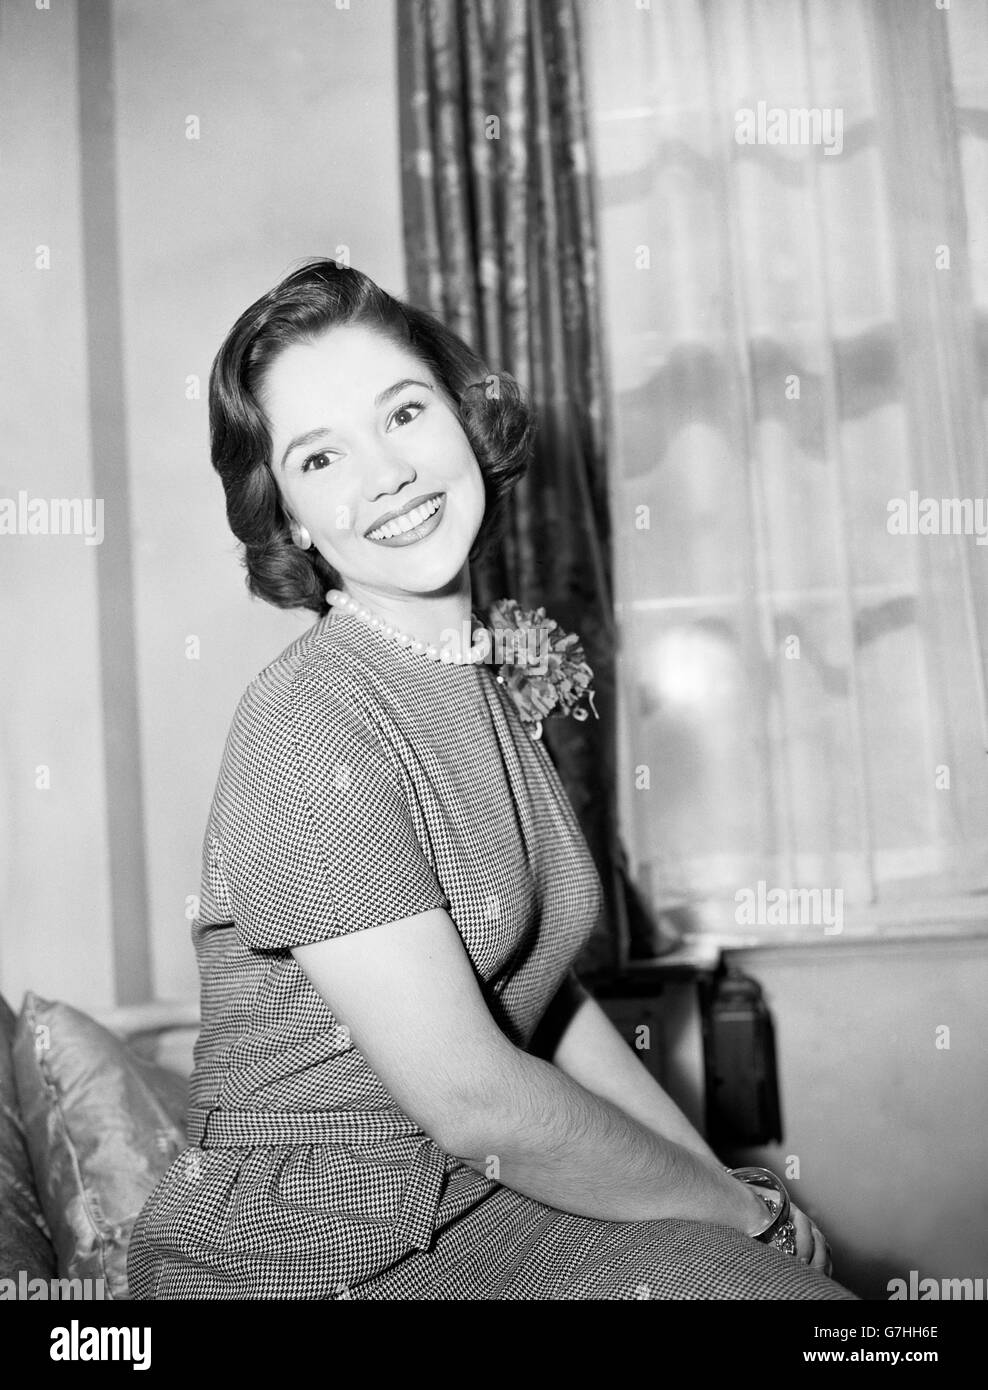 Miss america mary ann mobley Black and White Stock Photos & Images - Alamy